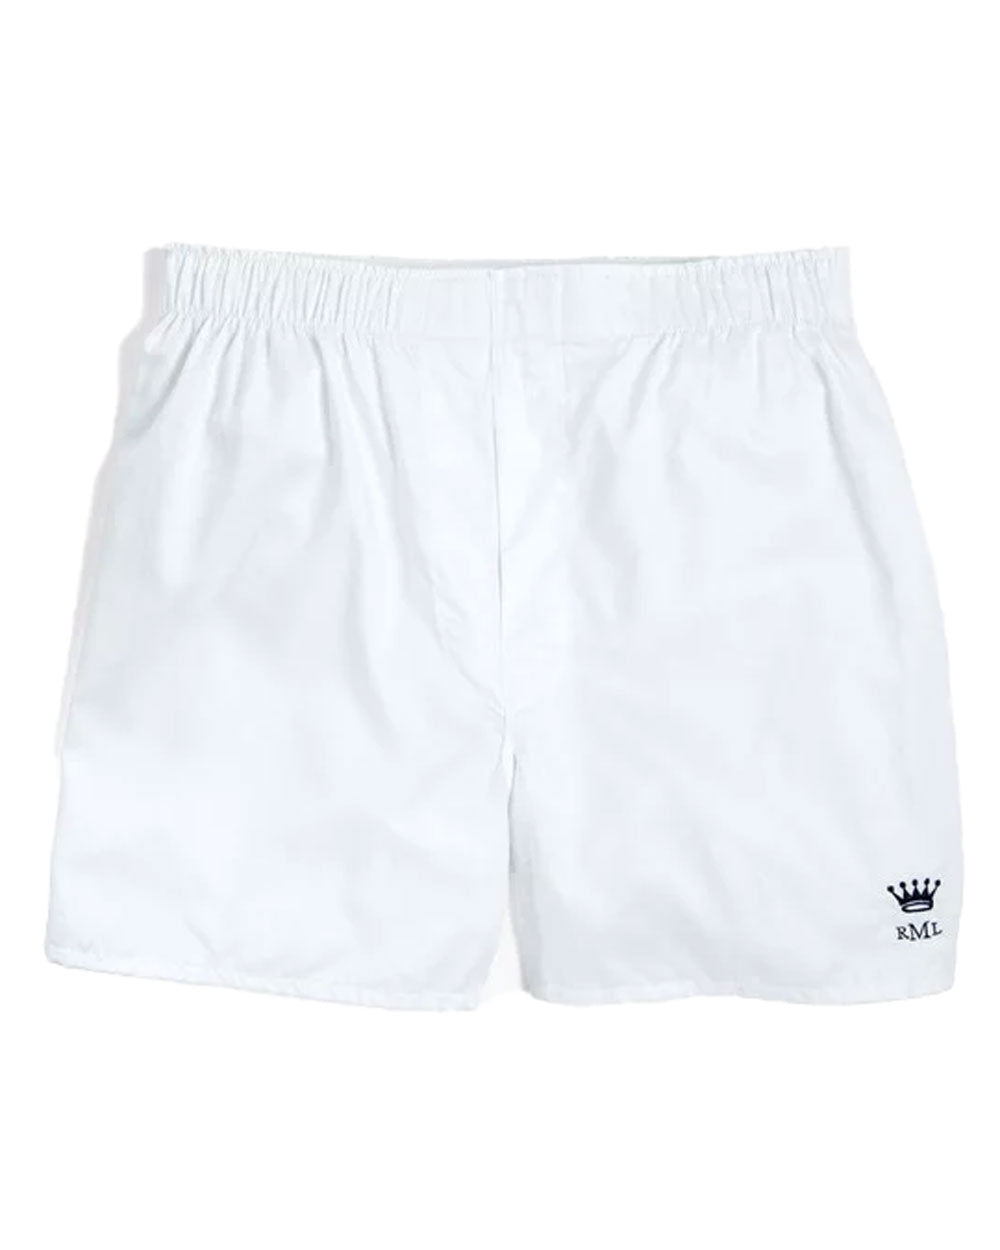 White Boxers Pack of 2